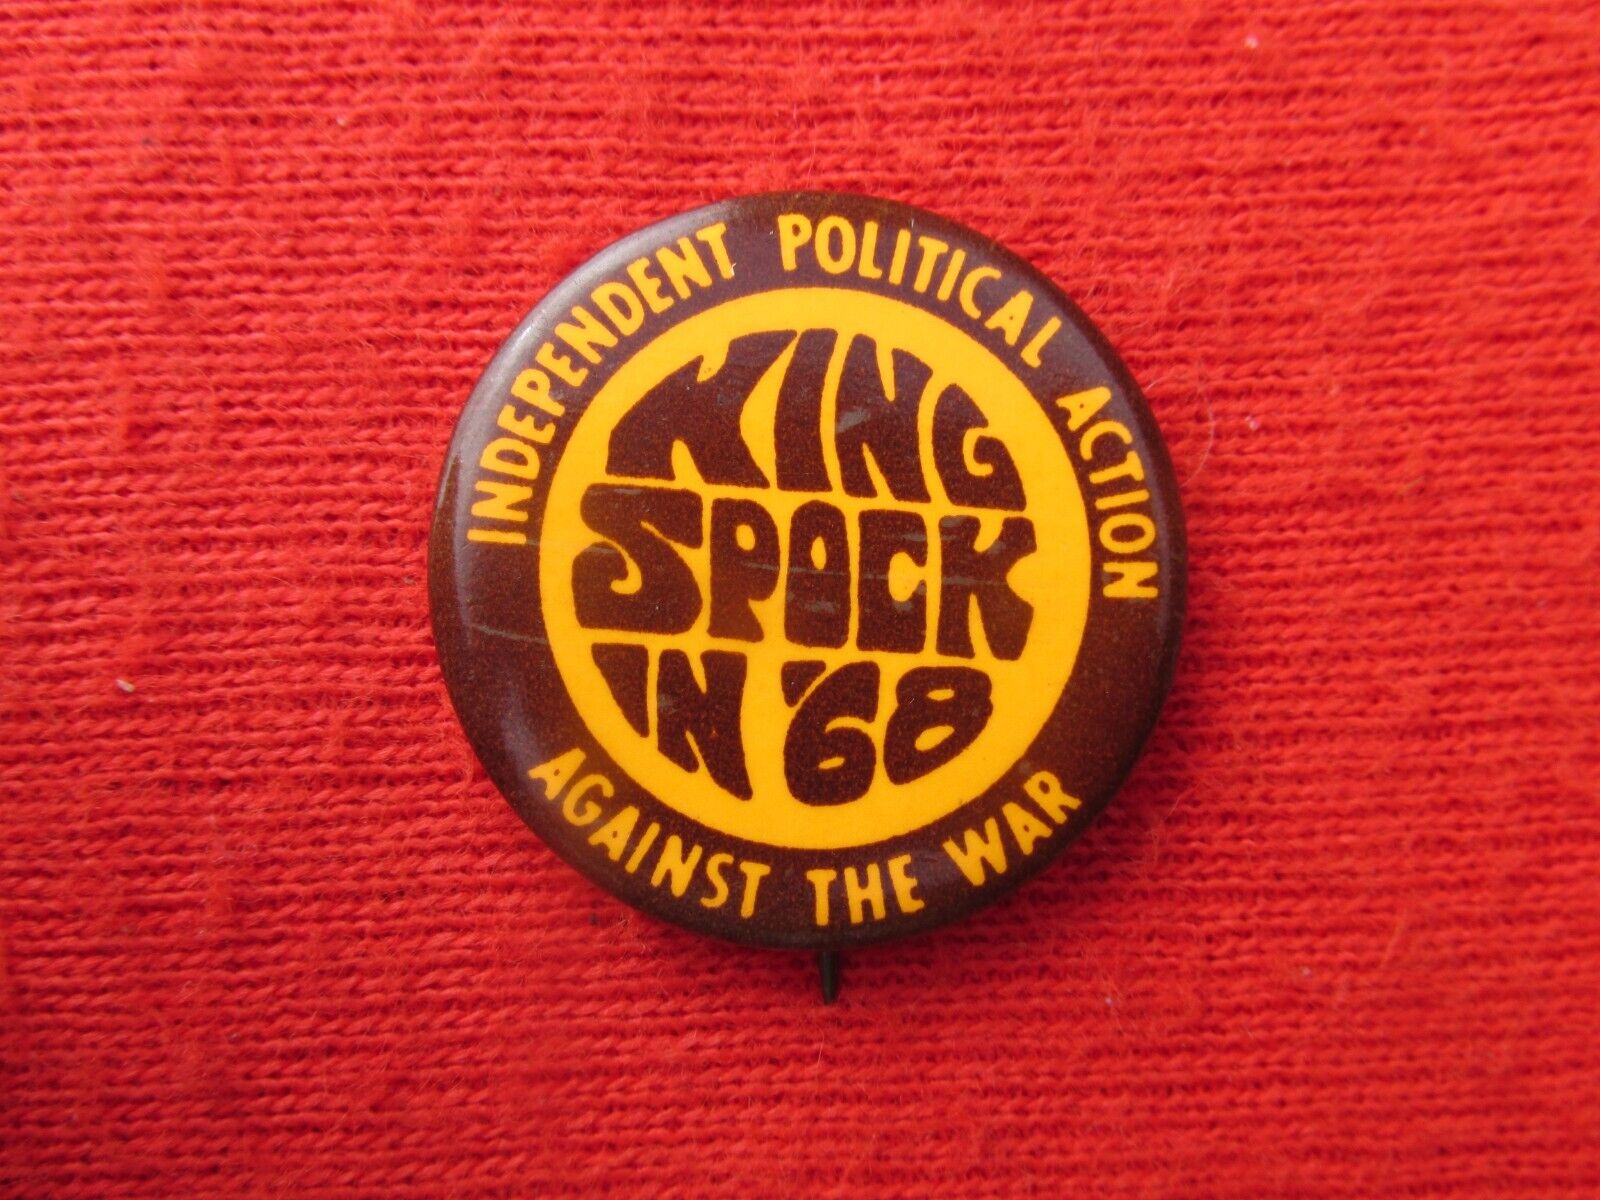 1968 SPOCK KING ANTI WAR INDEPENDENT POLITICAL ACTION  AGAINST THE WAR